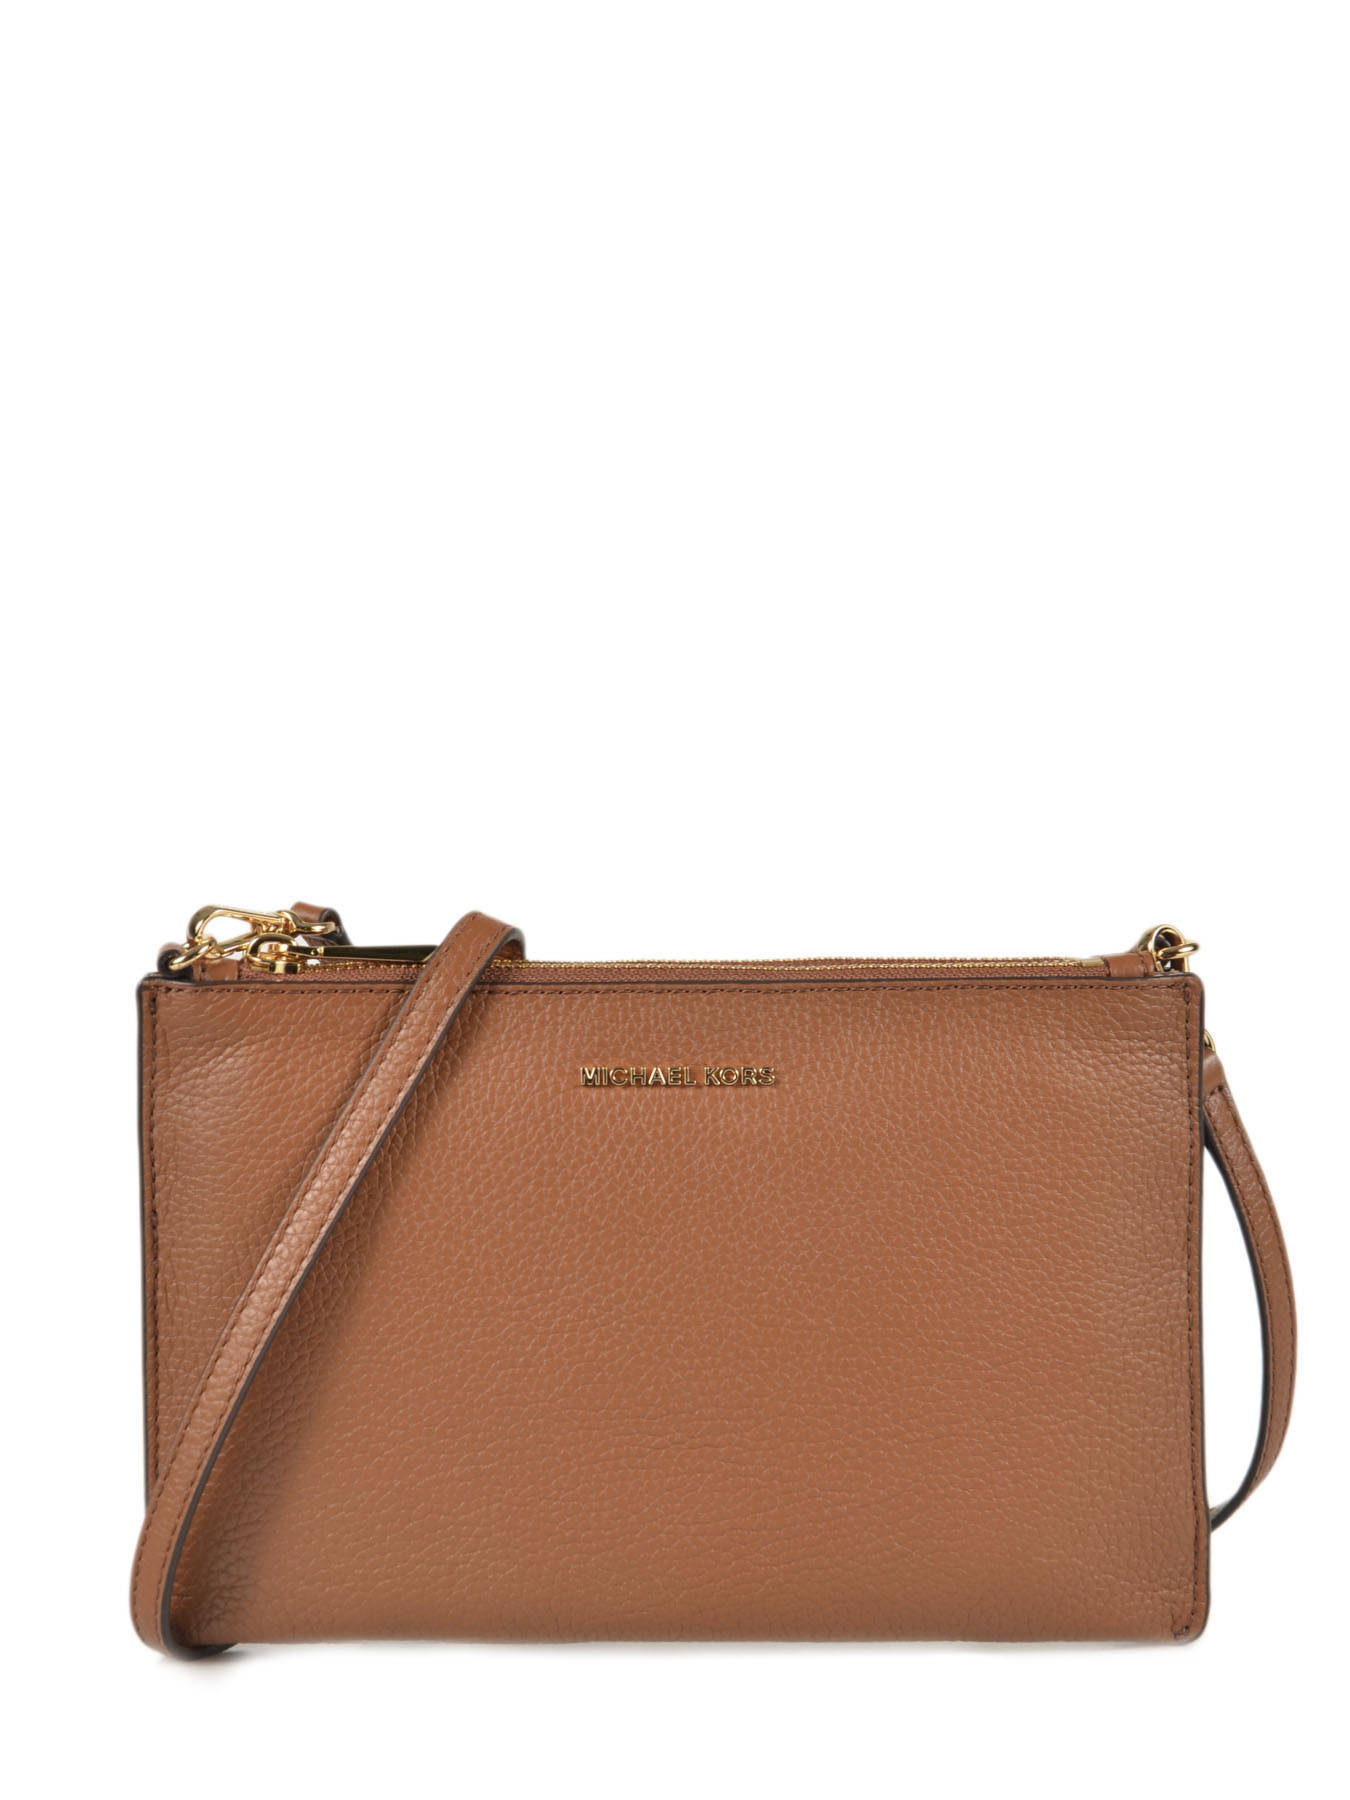 are all michael kors purses leather